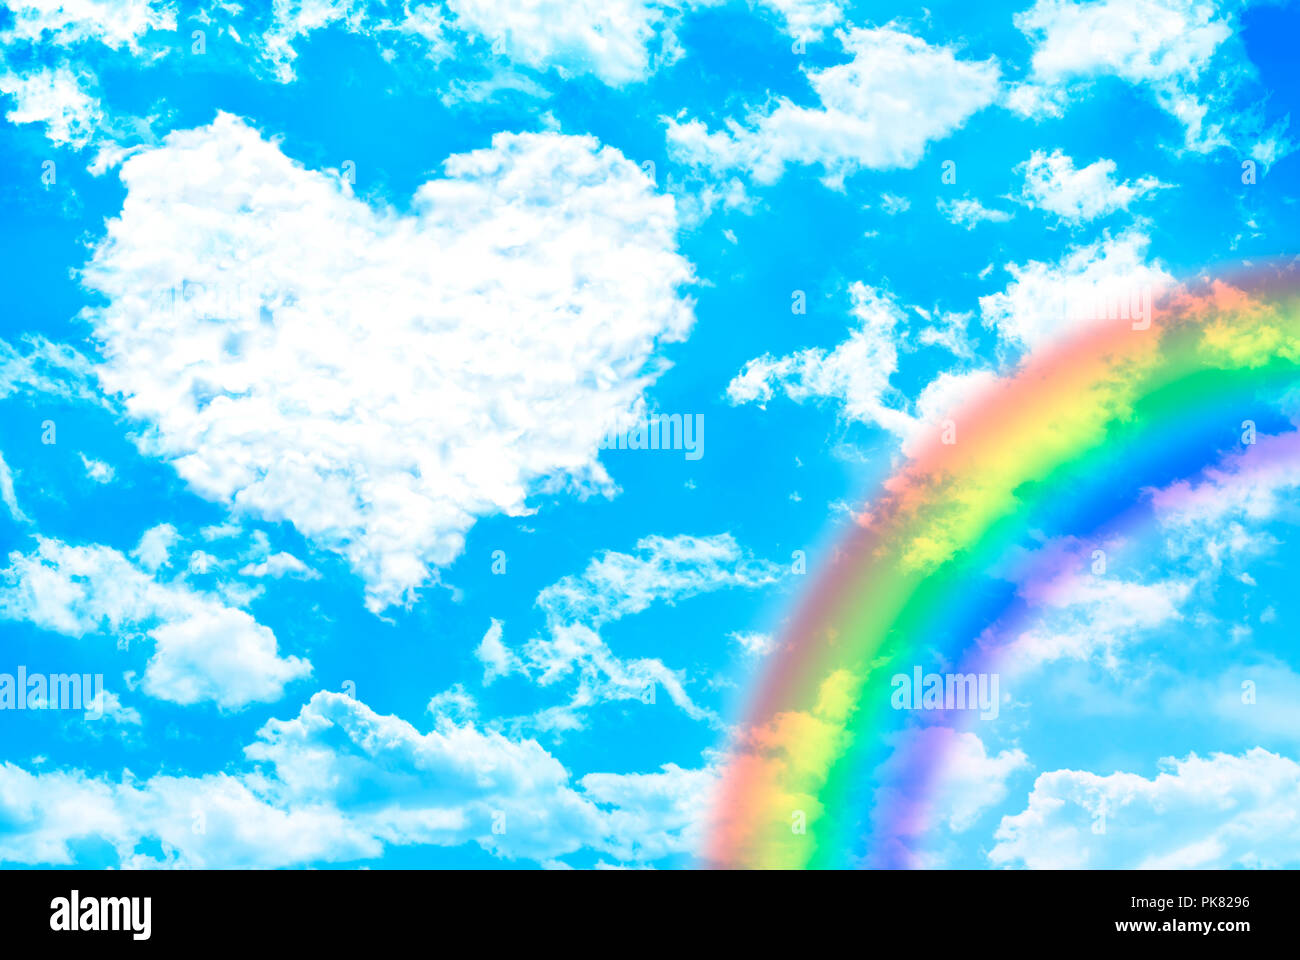 White clouds over blue sky forming “heart” shape with rainbow. Valentine concept. Stock Photo